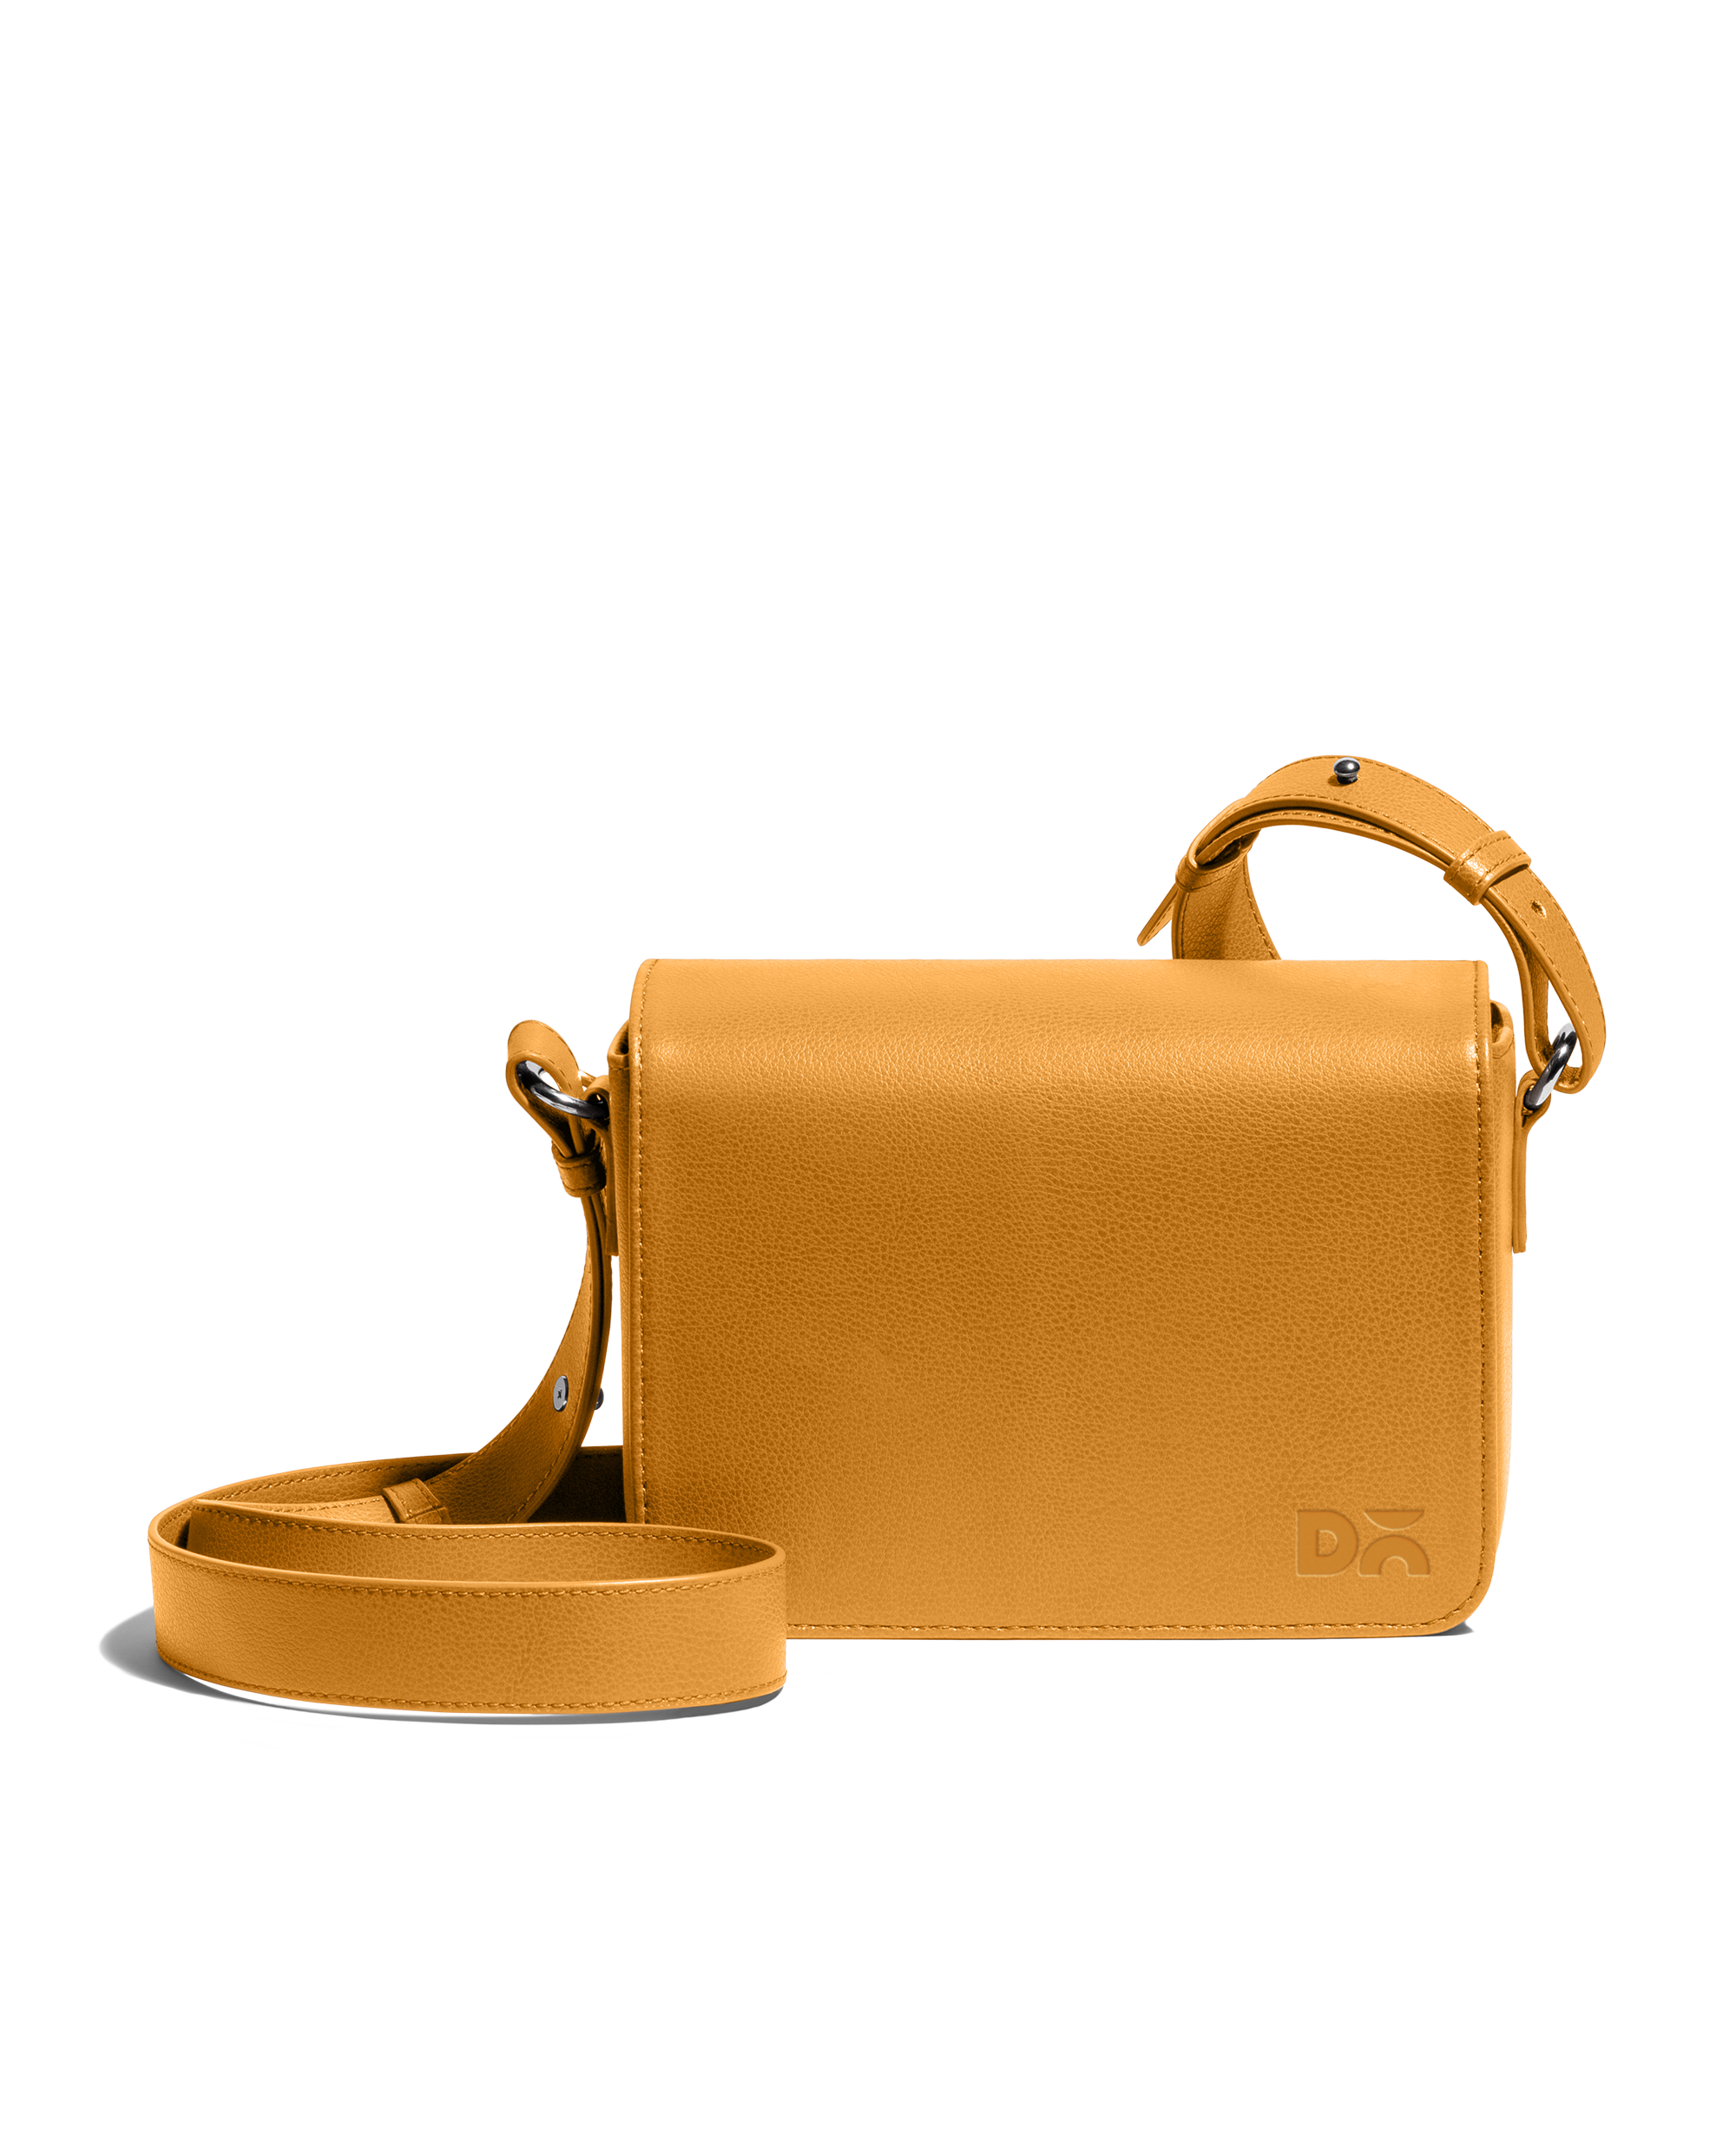 Yellow Leather Tote Bag Large Shoulder Bags | Baginning